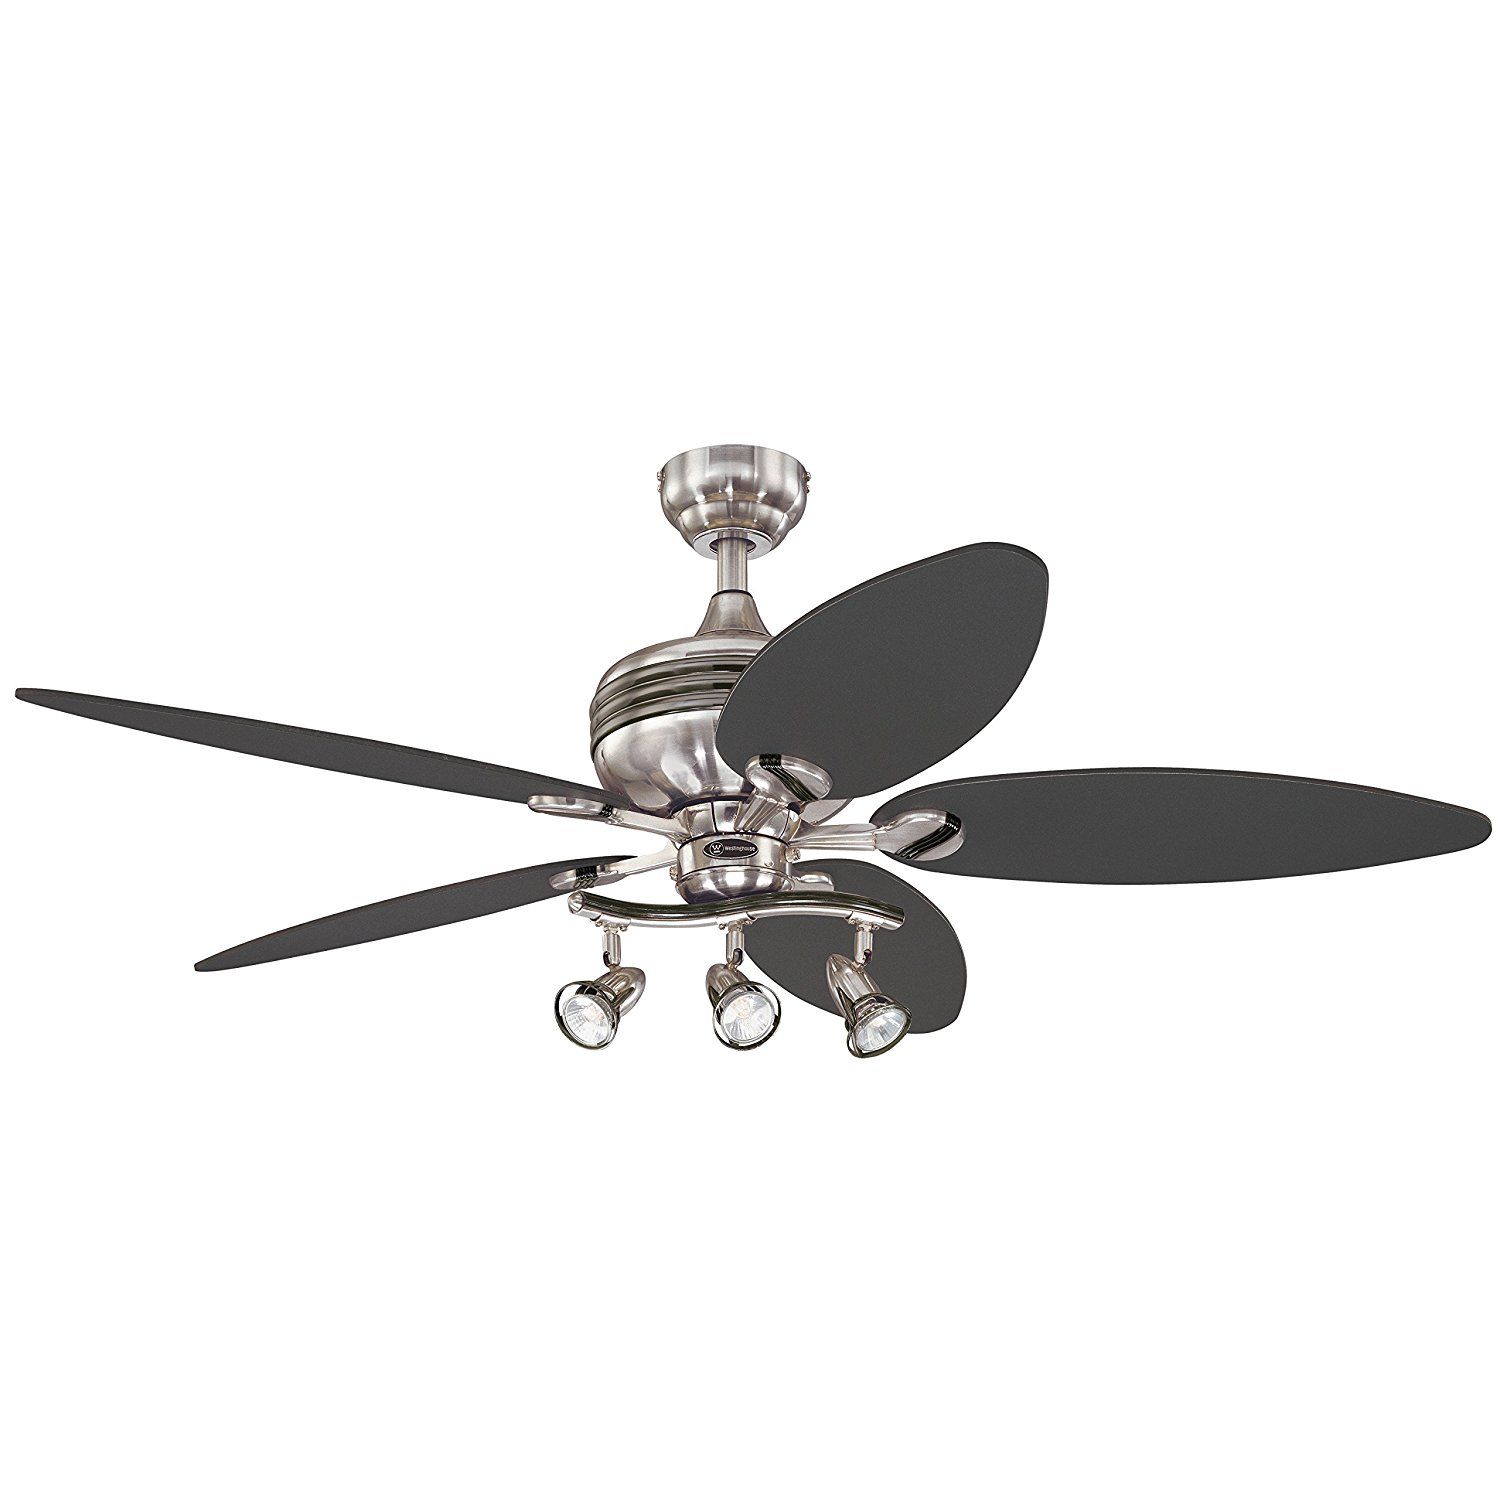 Westinghouse 7234220 Xavier II 52-Inch Five-Blade Indoor Ceiling Fan with Three Spot Lights, Brushed Nickel with Gun Metal Accents